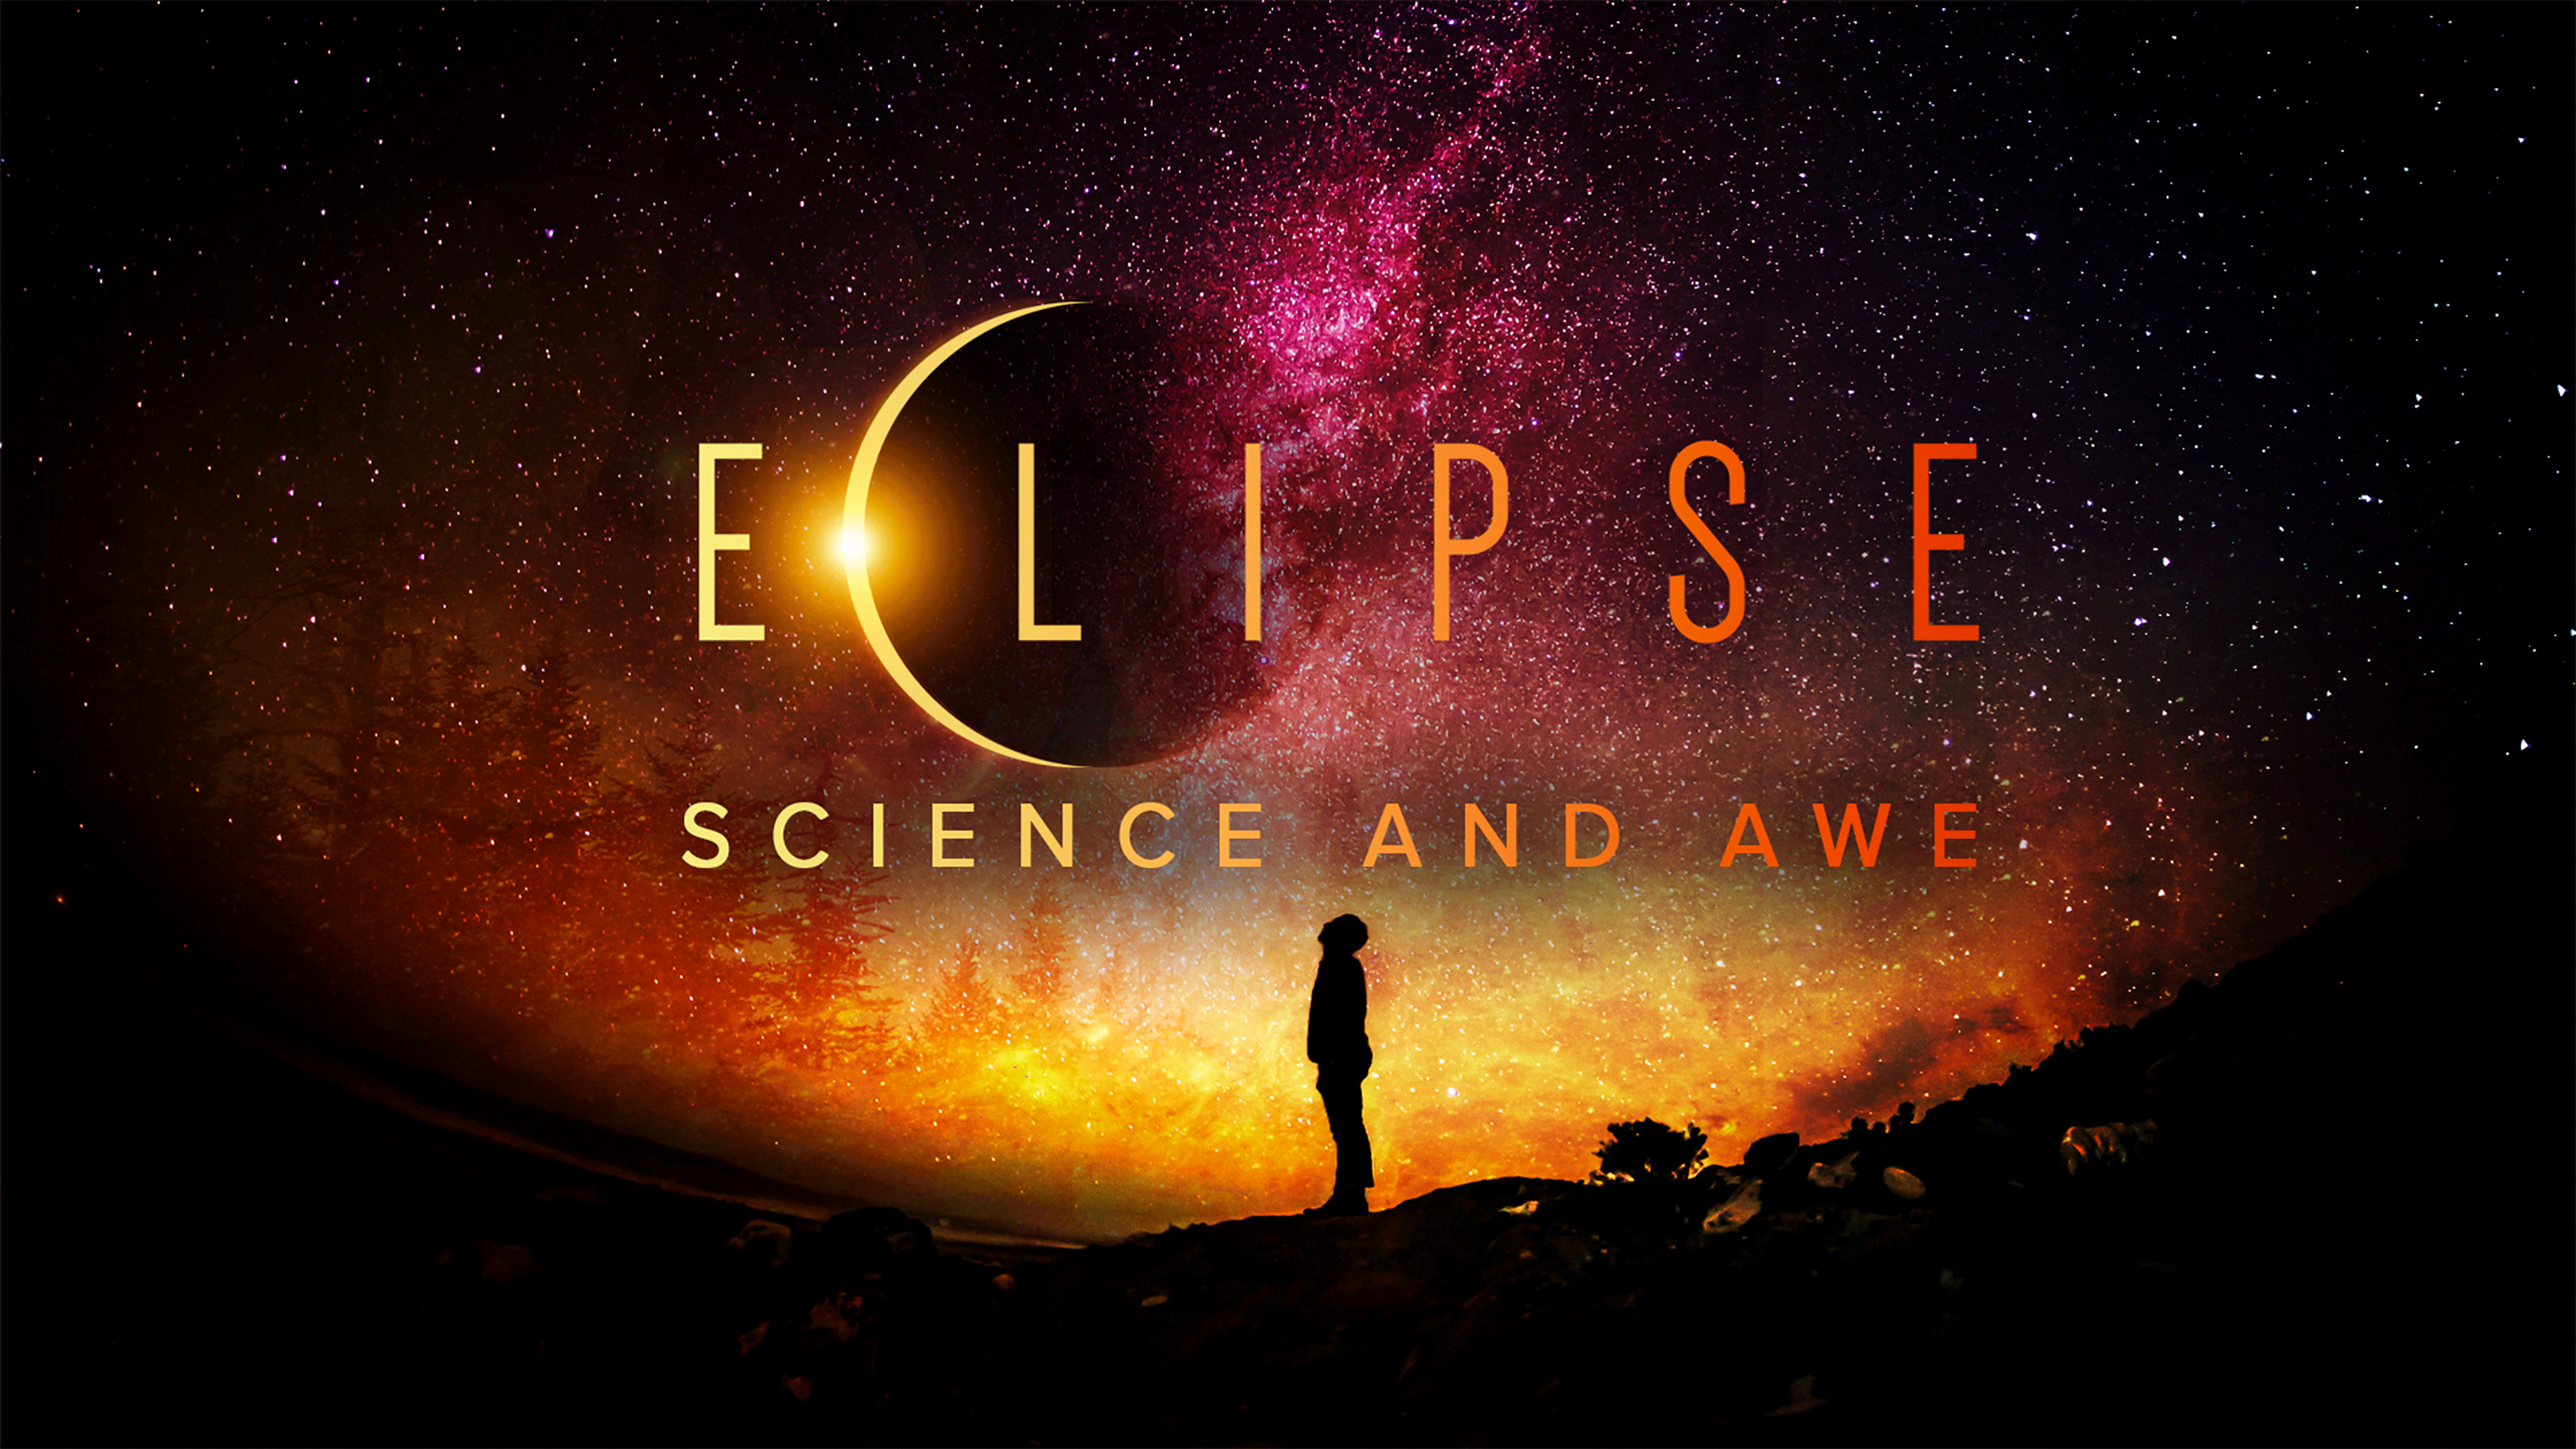 Eclipse: Science and Awe